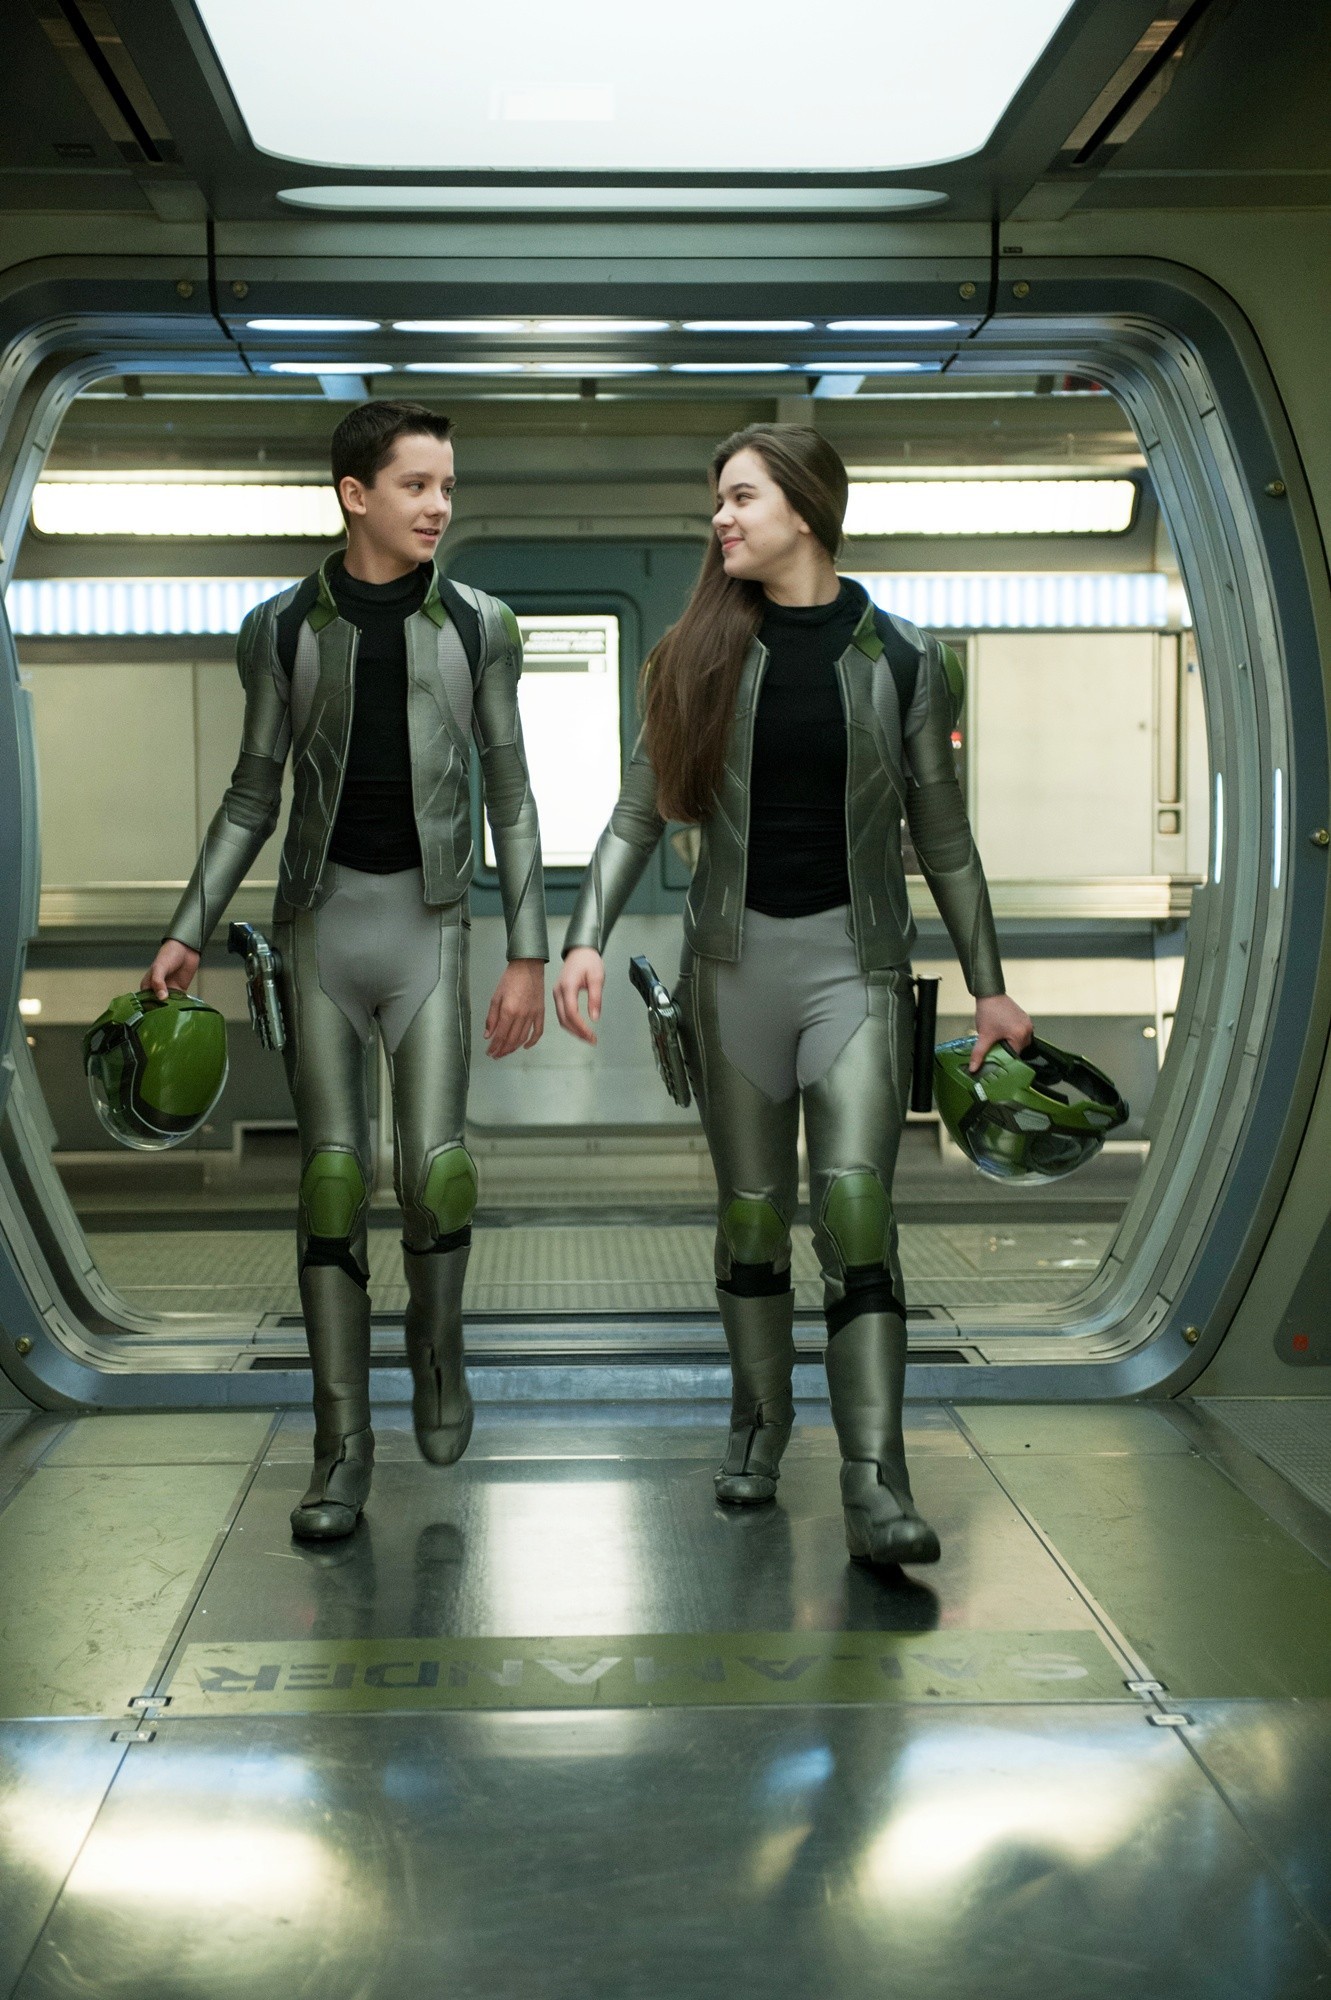 Asa Butterfield stars as Ender Wiggin and Hailee Steinfeld stars as Petra Arkanian in Summit Entertainment's Ender's Game (2013). Photo credit by Richard Foreman.